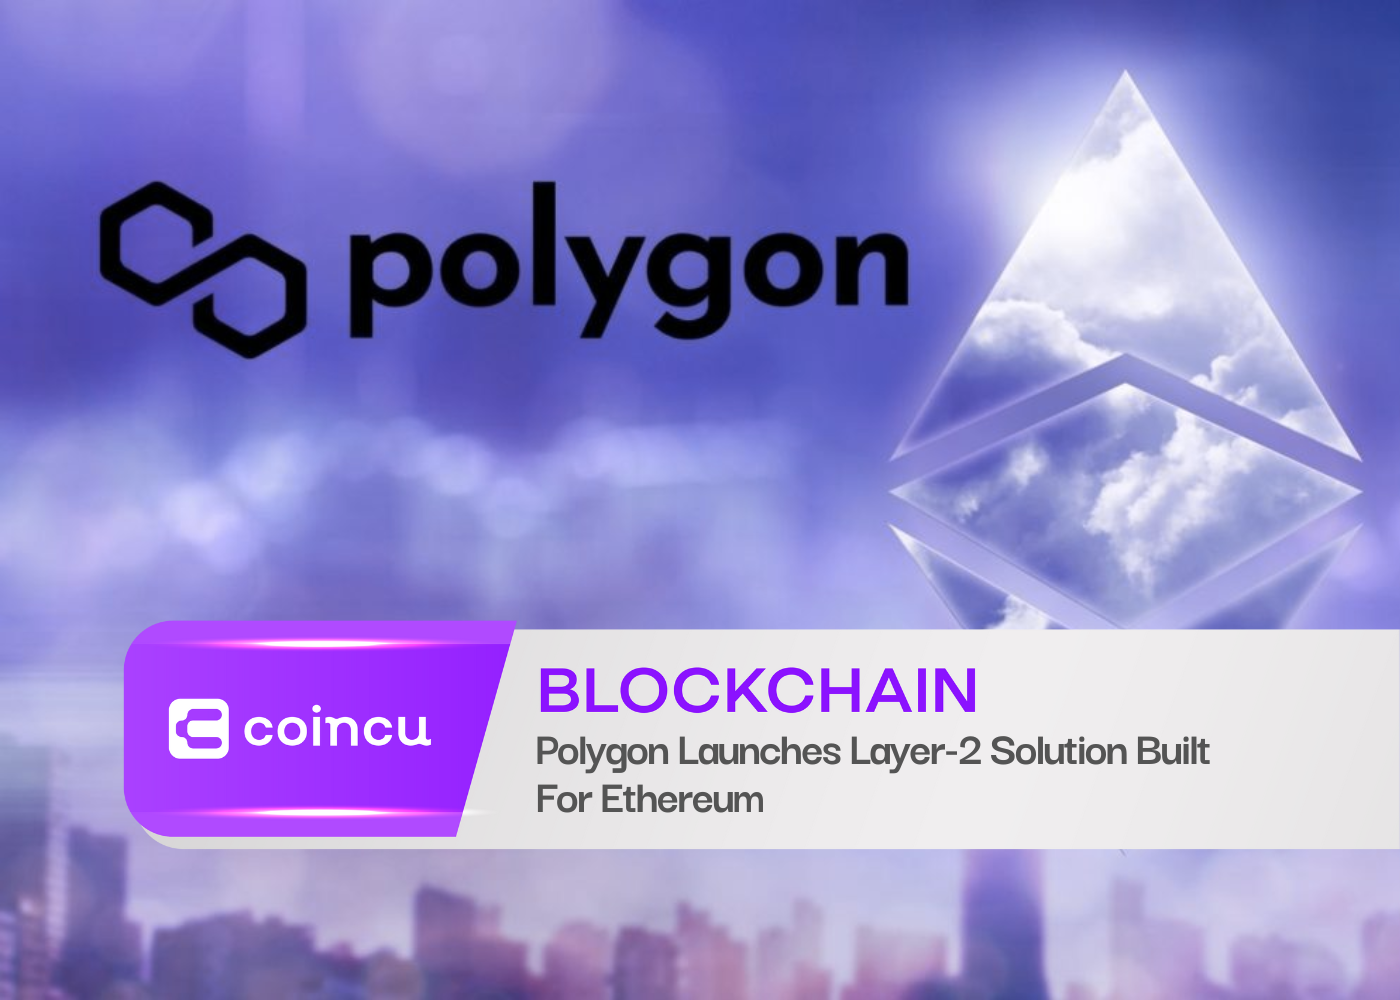 Polygon Launches Layer-2 Solution Built For Ethereum